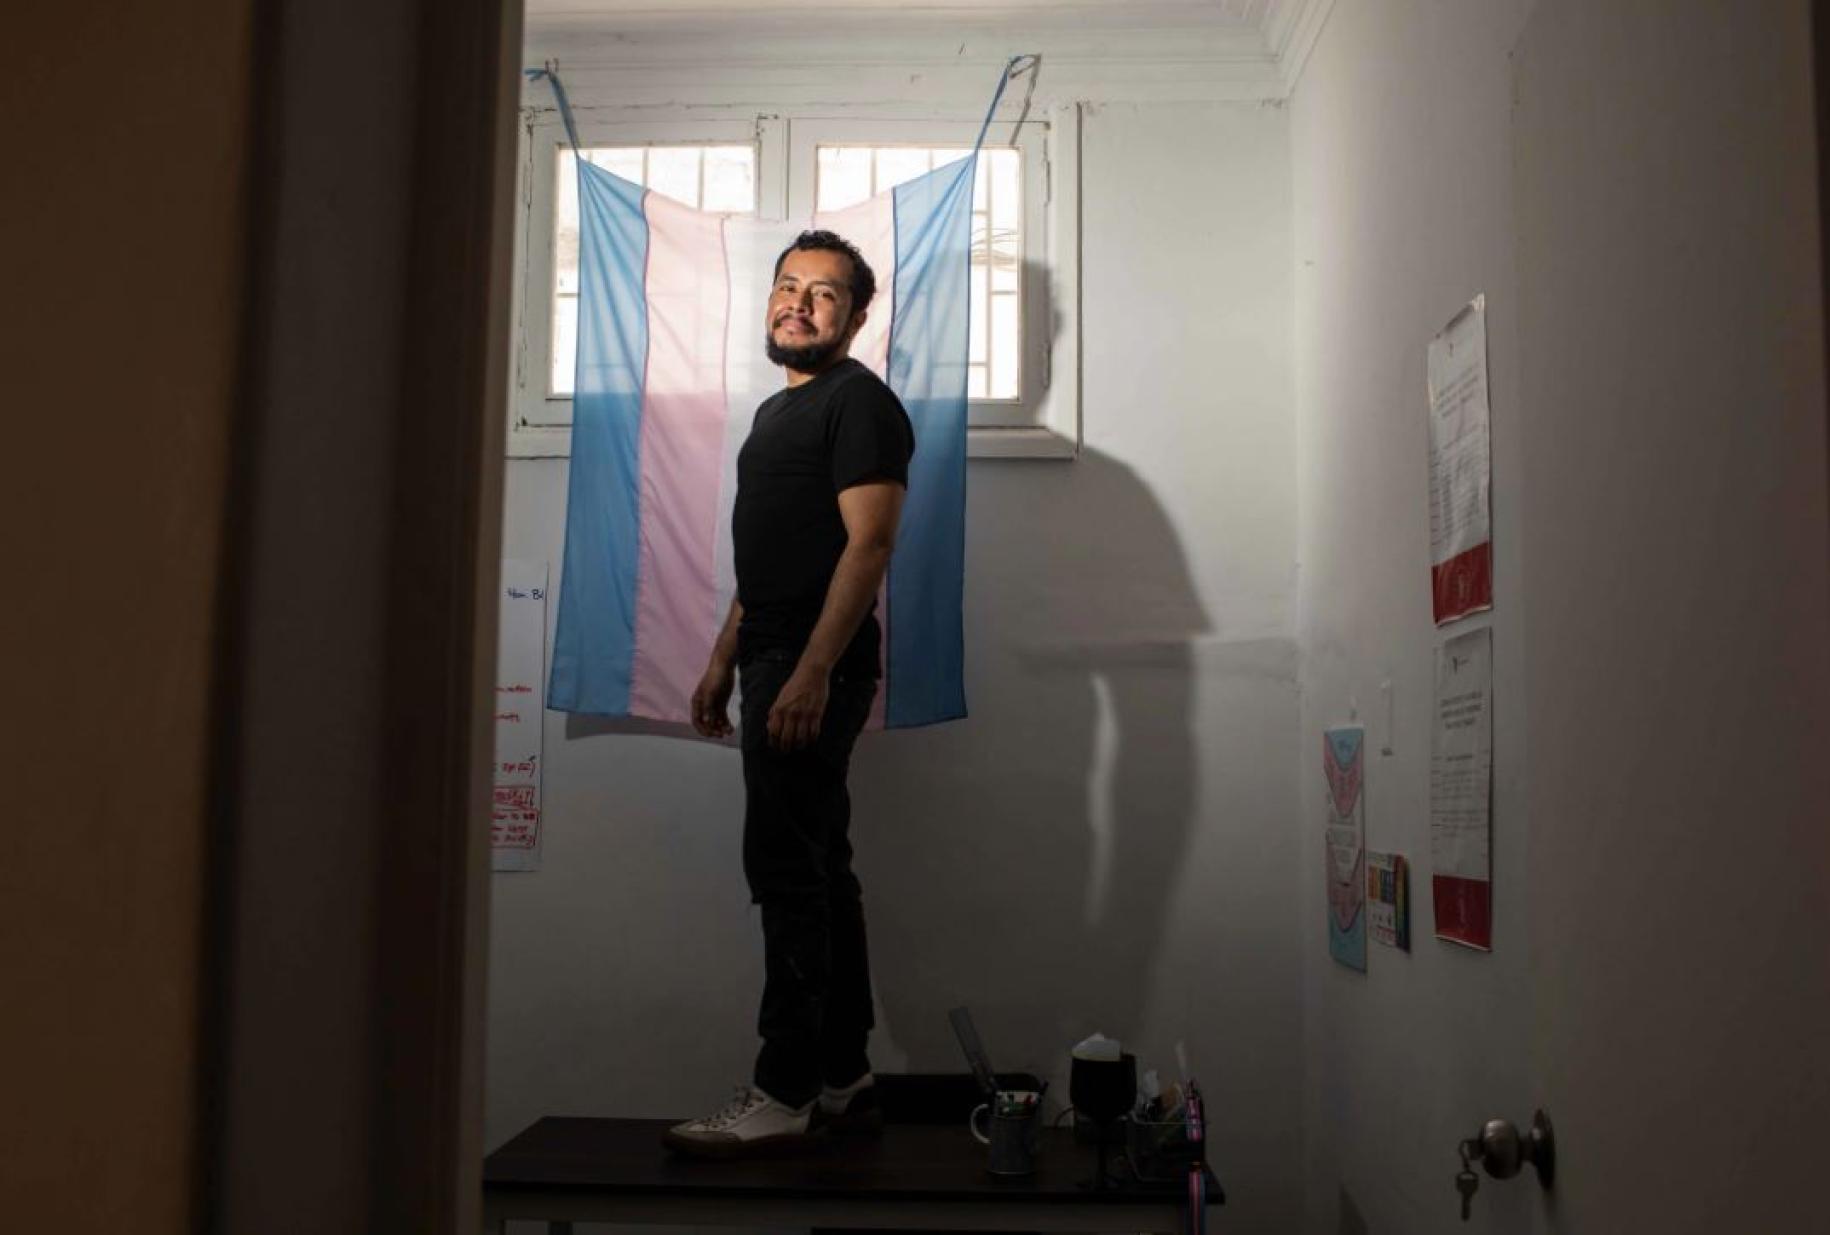 Photo shows Marco standing atop a desk, as he stands in front of a flag draped over a window.